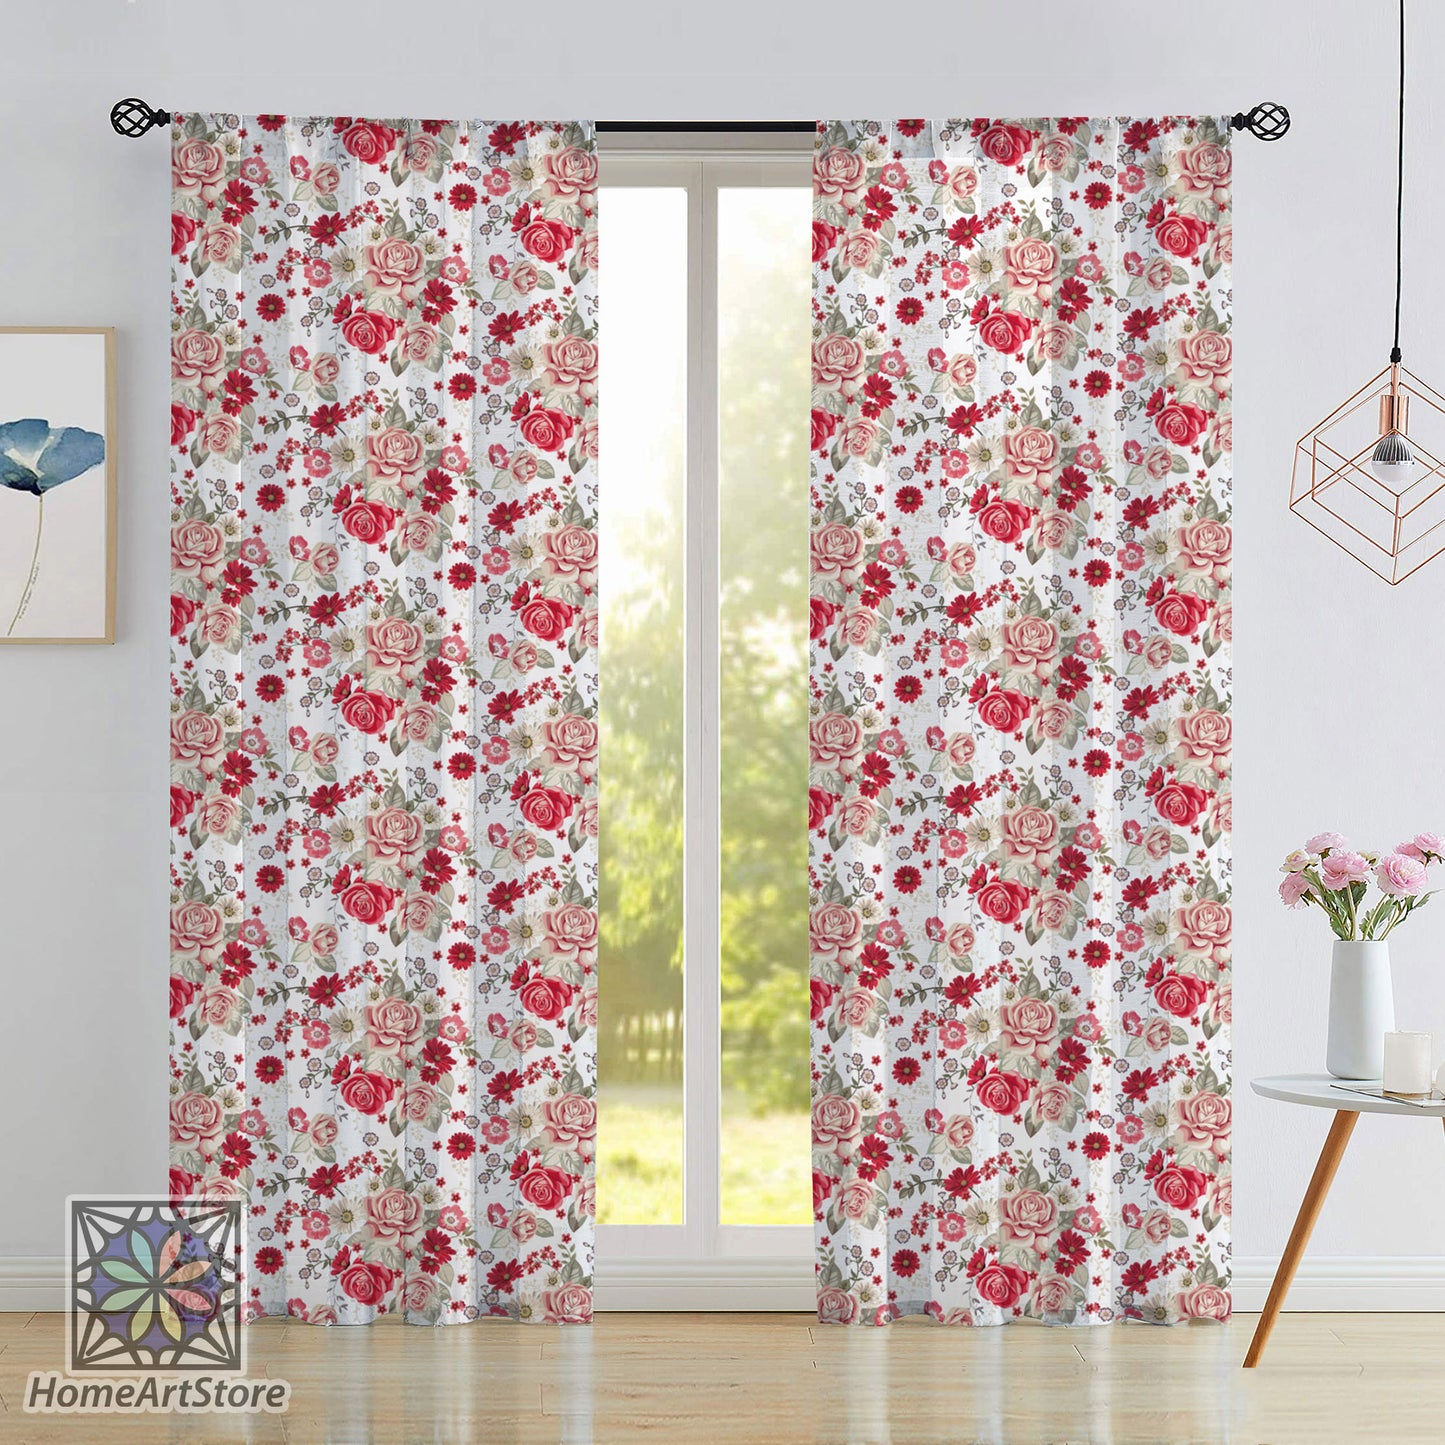 Rose Themed Curtain, Floral Curtain, Decorative Home Decor, Red Rose Curtain, Bedroom Curtain